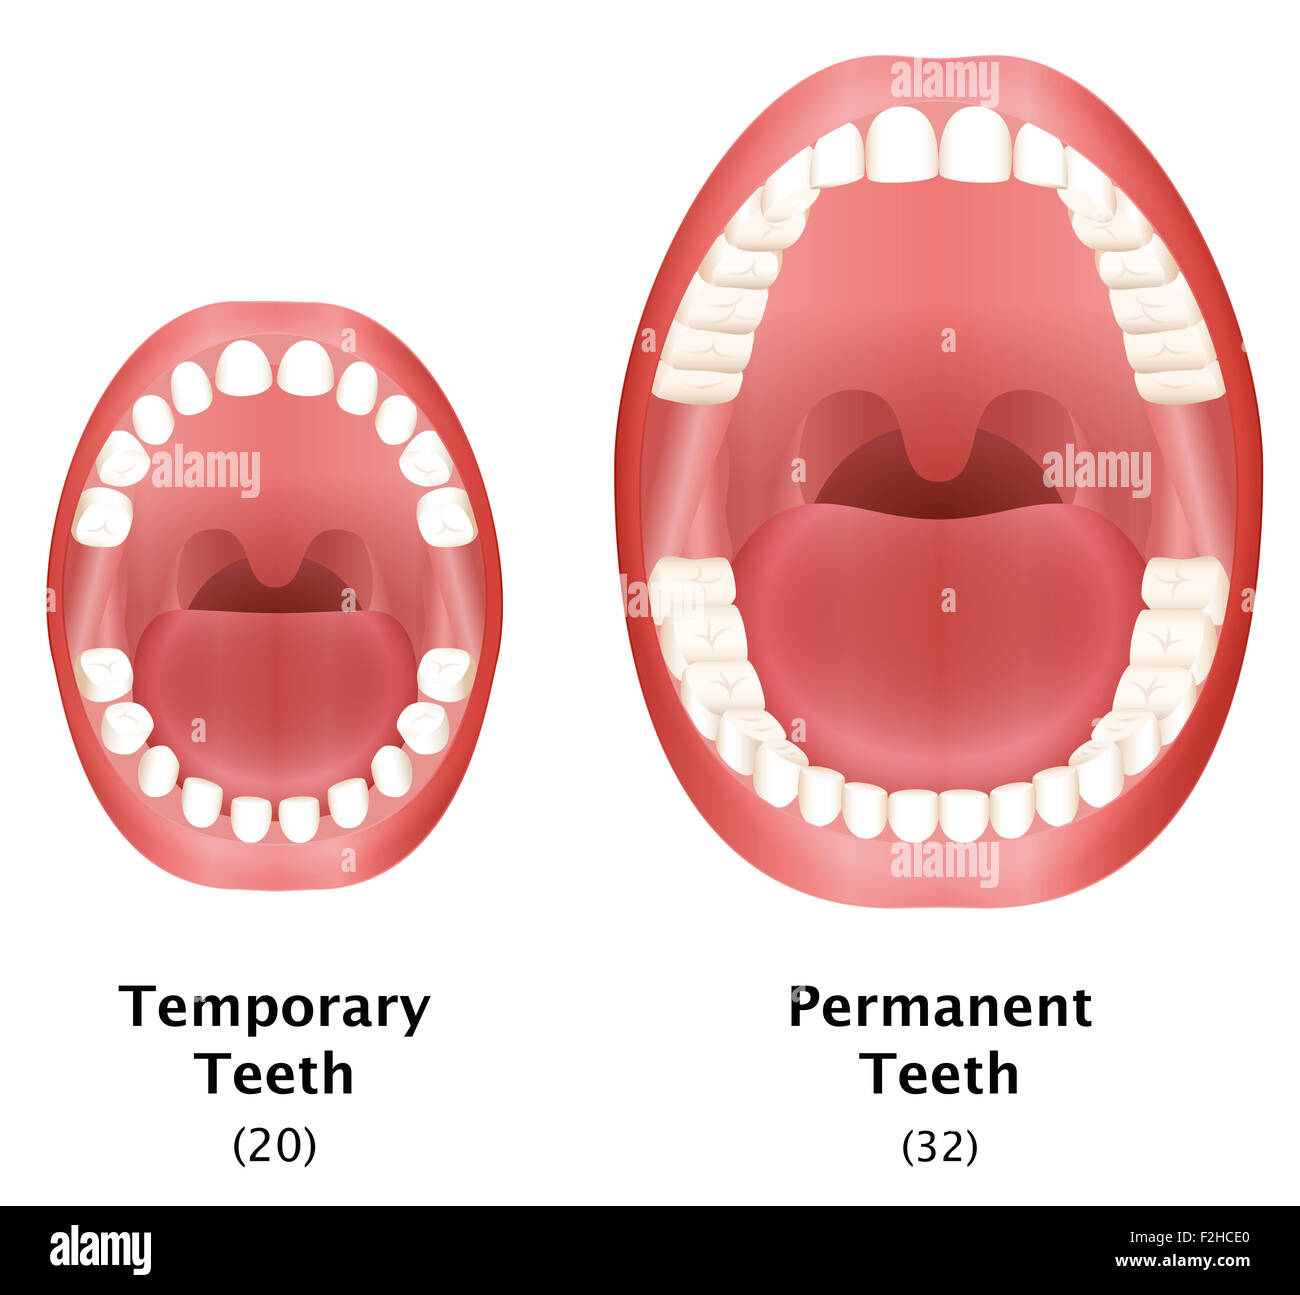 Comparison of temporary teeth of a child and permanent teeth of an adult natural dentition. Stock Photo